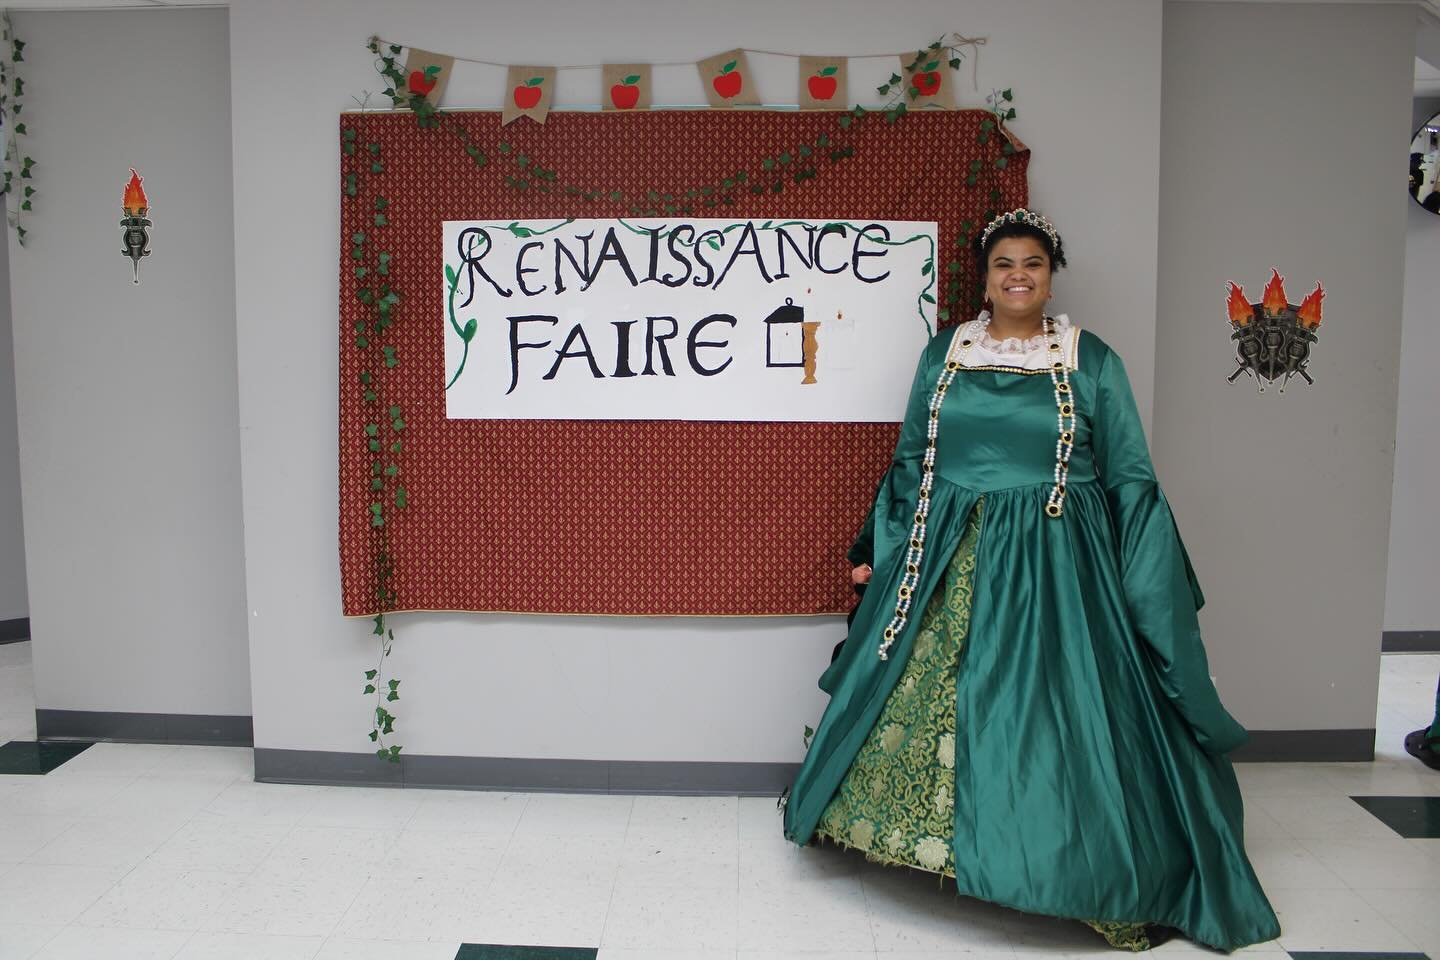 The Renaissance Faire was today and the 6th grade students had such a fun time showcasing their hard work and informing other students and families!

There were over 40 booths focused on various Renaissance topics like Art &amp; Culture, Health, Weap